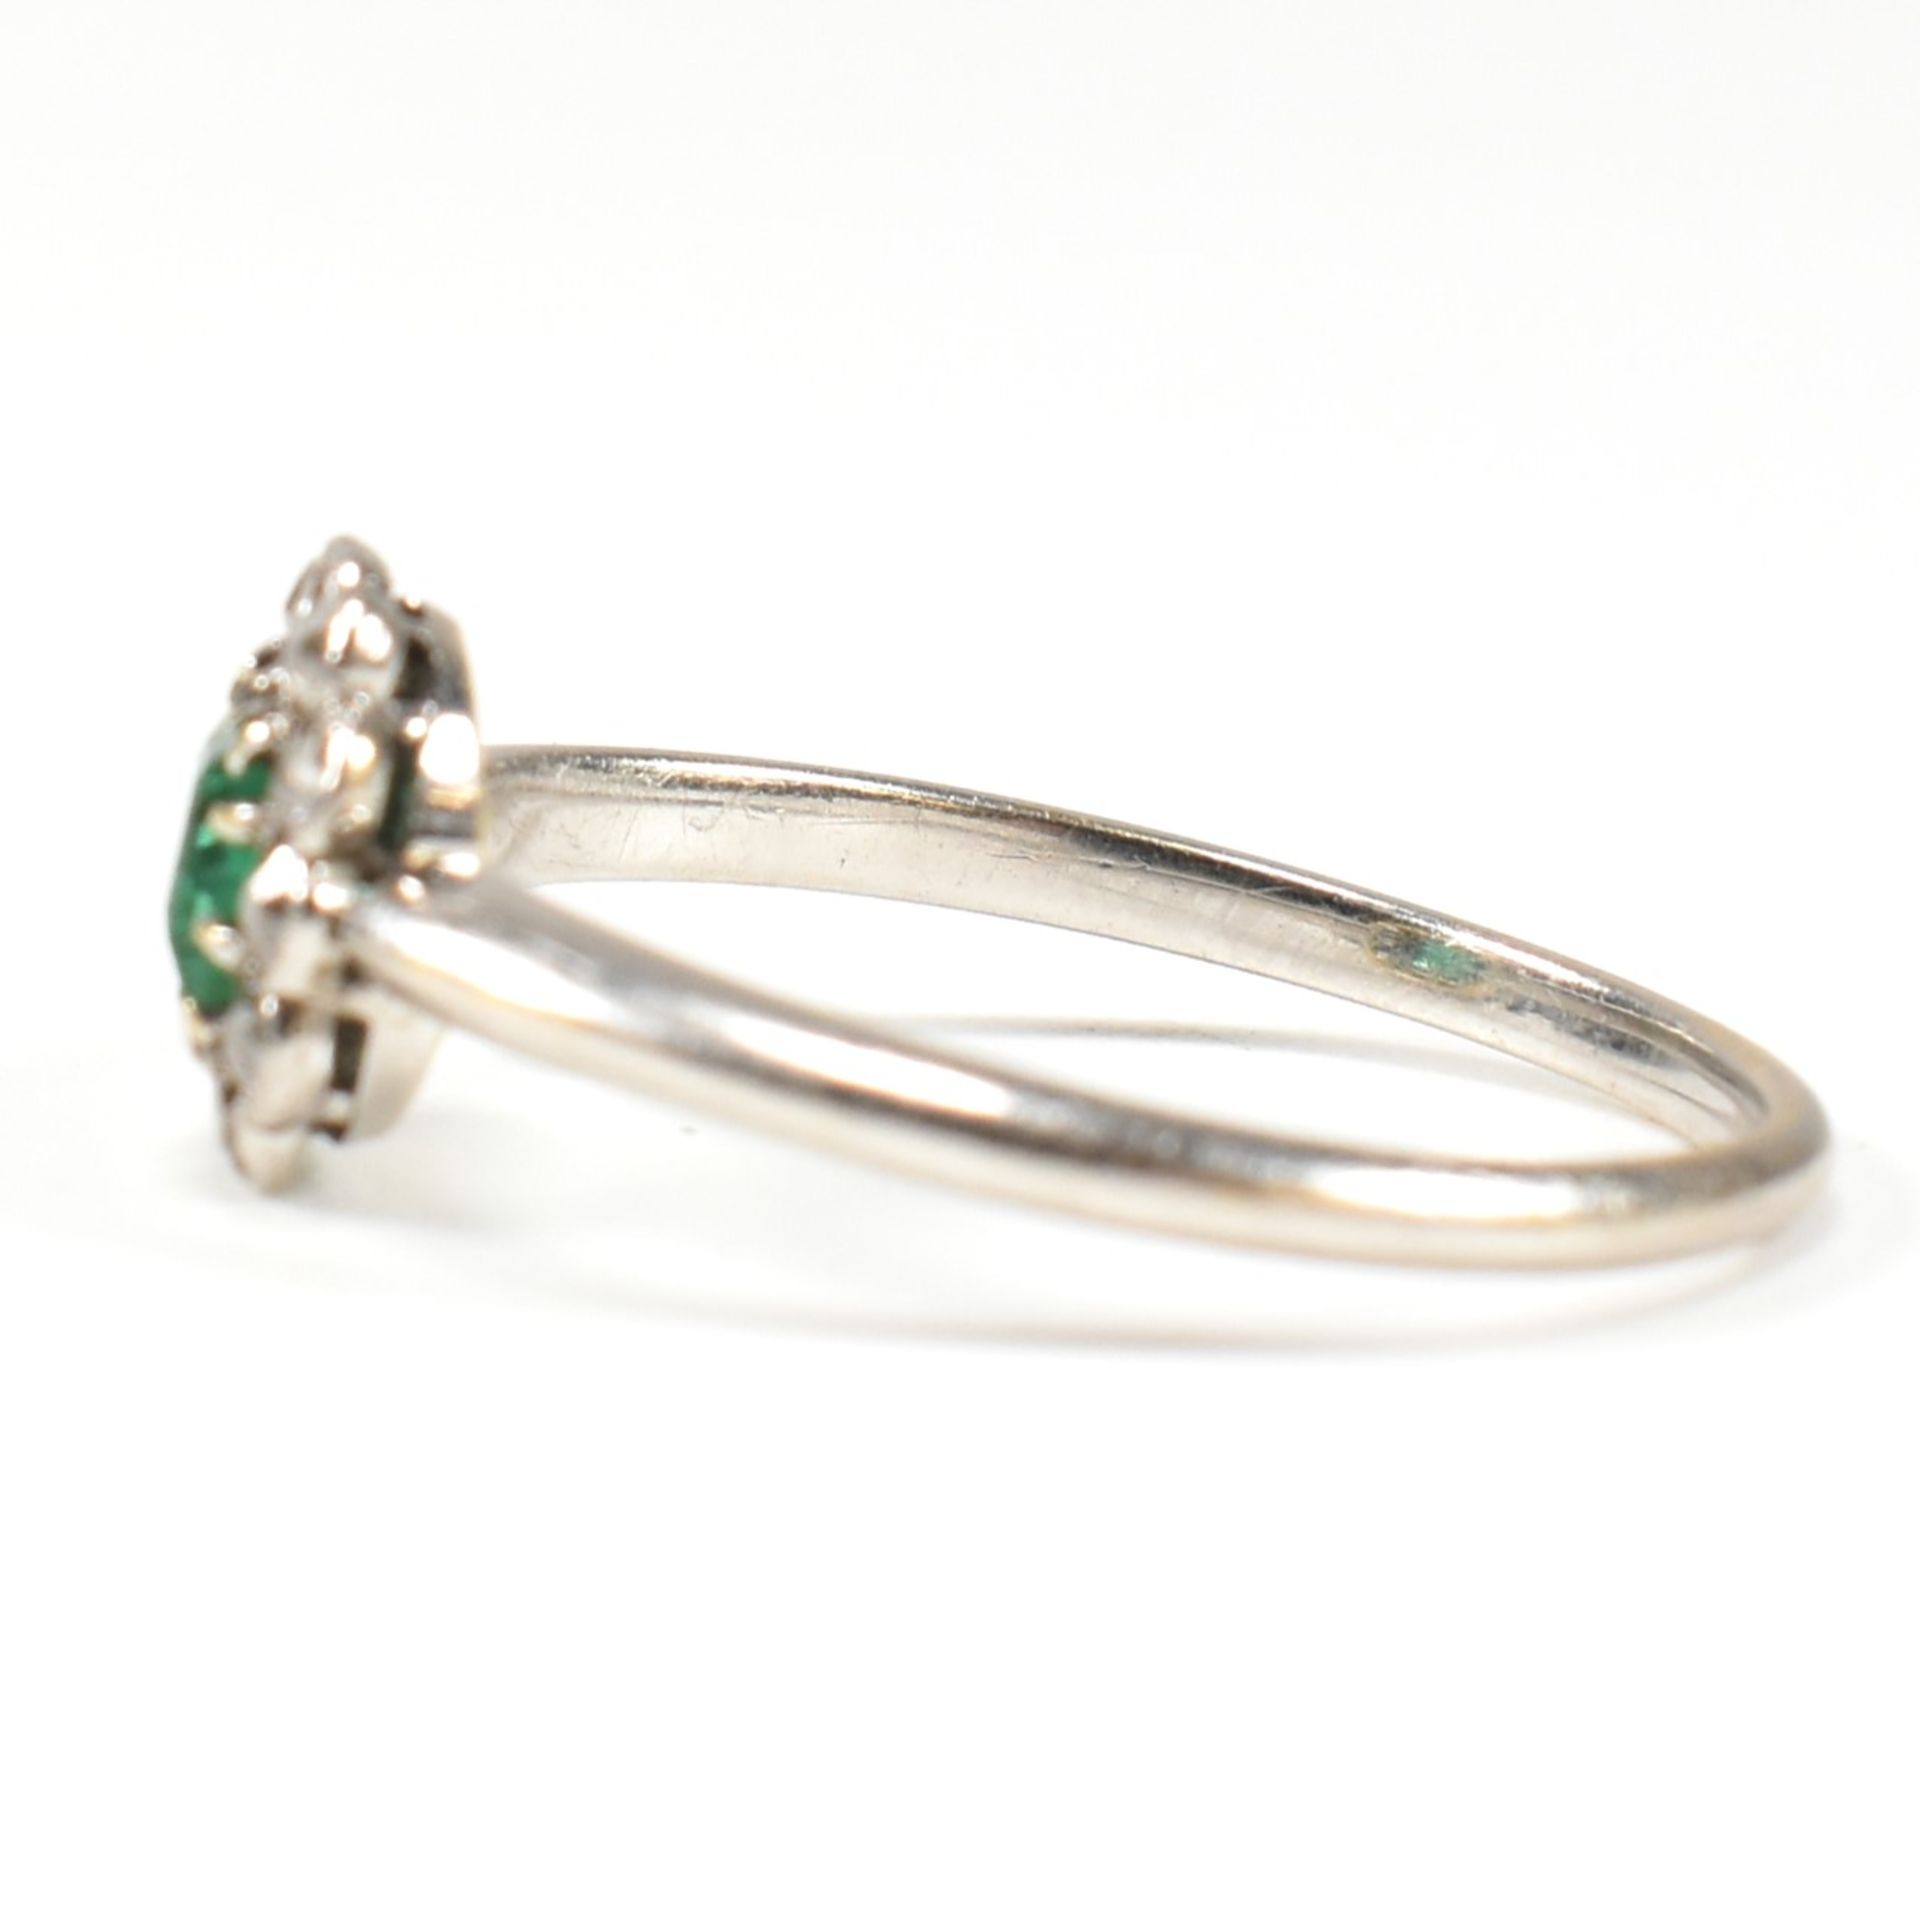 1920S 18CT WHITE GOLD EMERALD & DIAMOND CLUSTER RING - Image 6 of 9